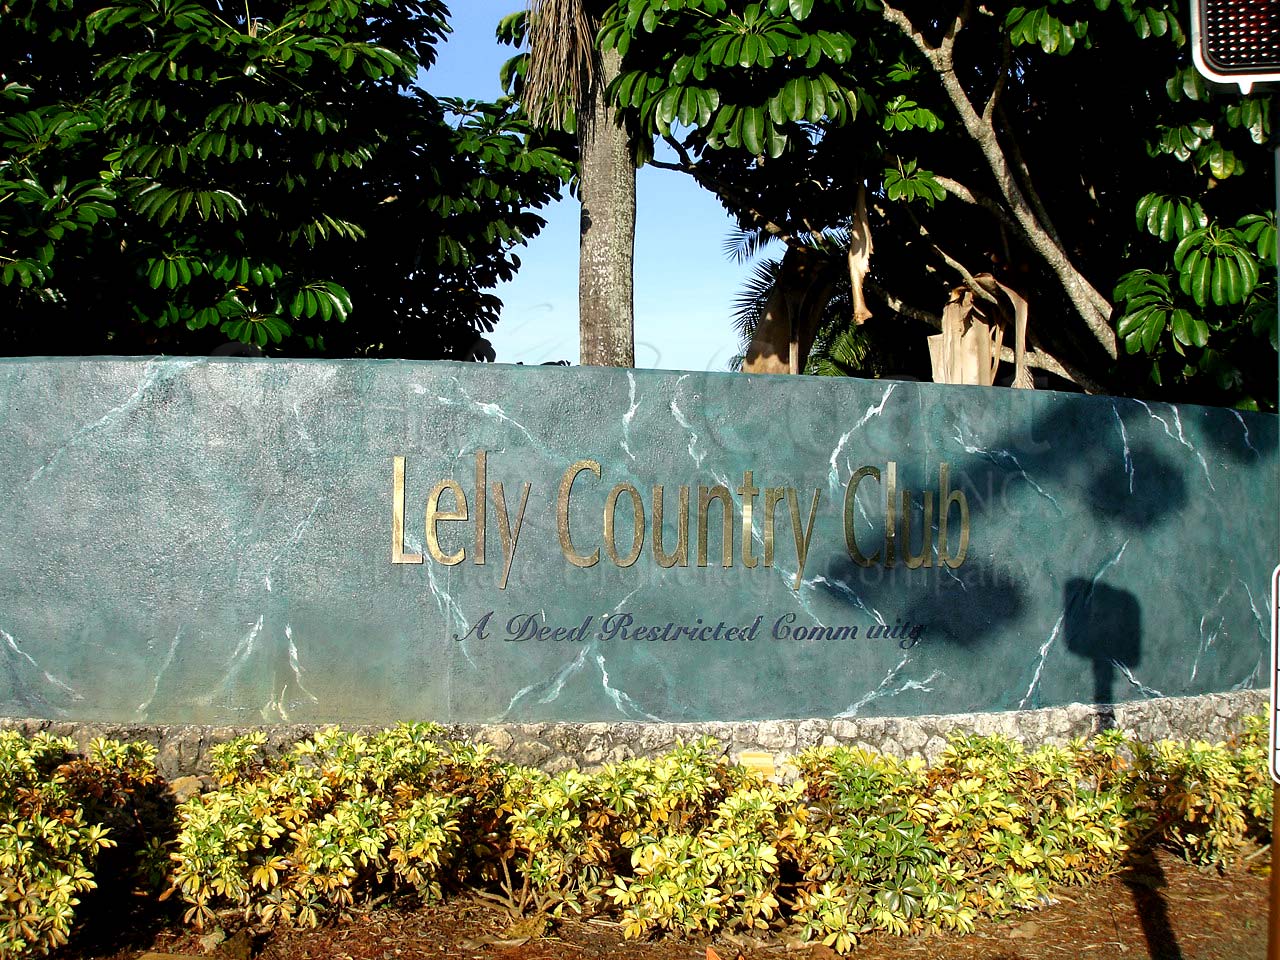 LELY COUNTRY CLUB Signage